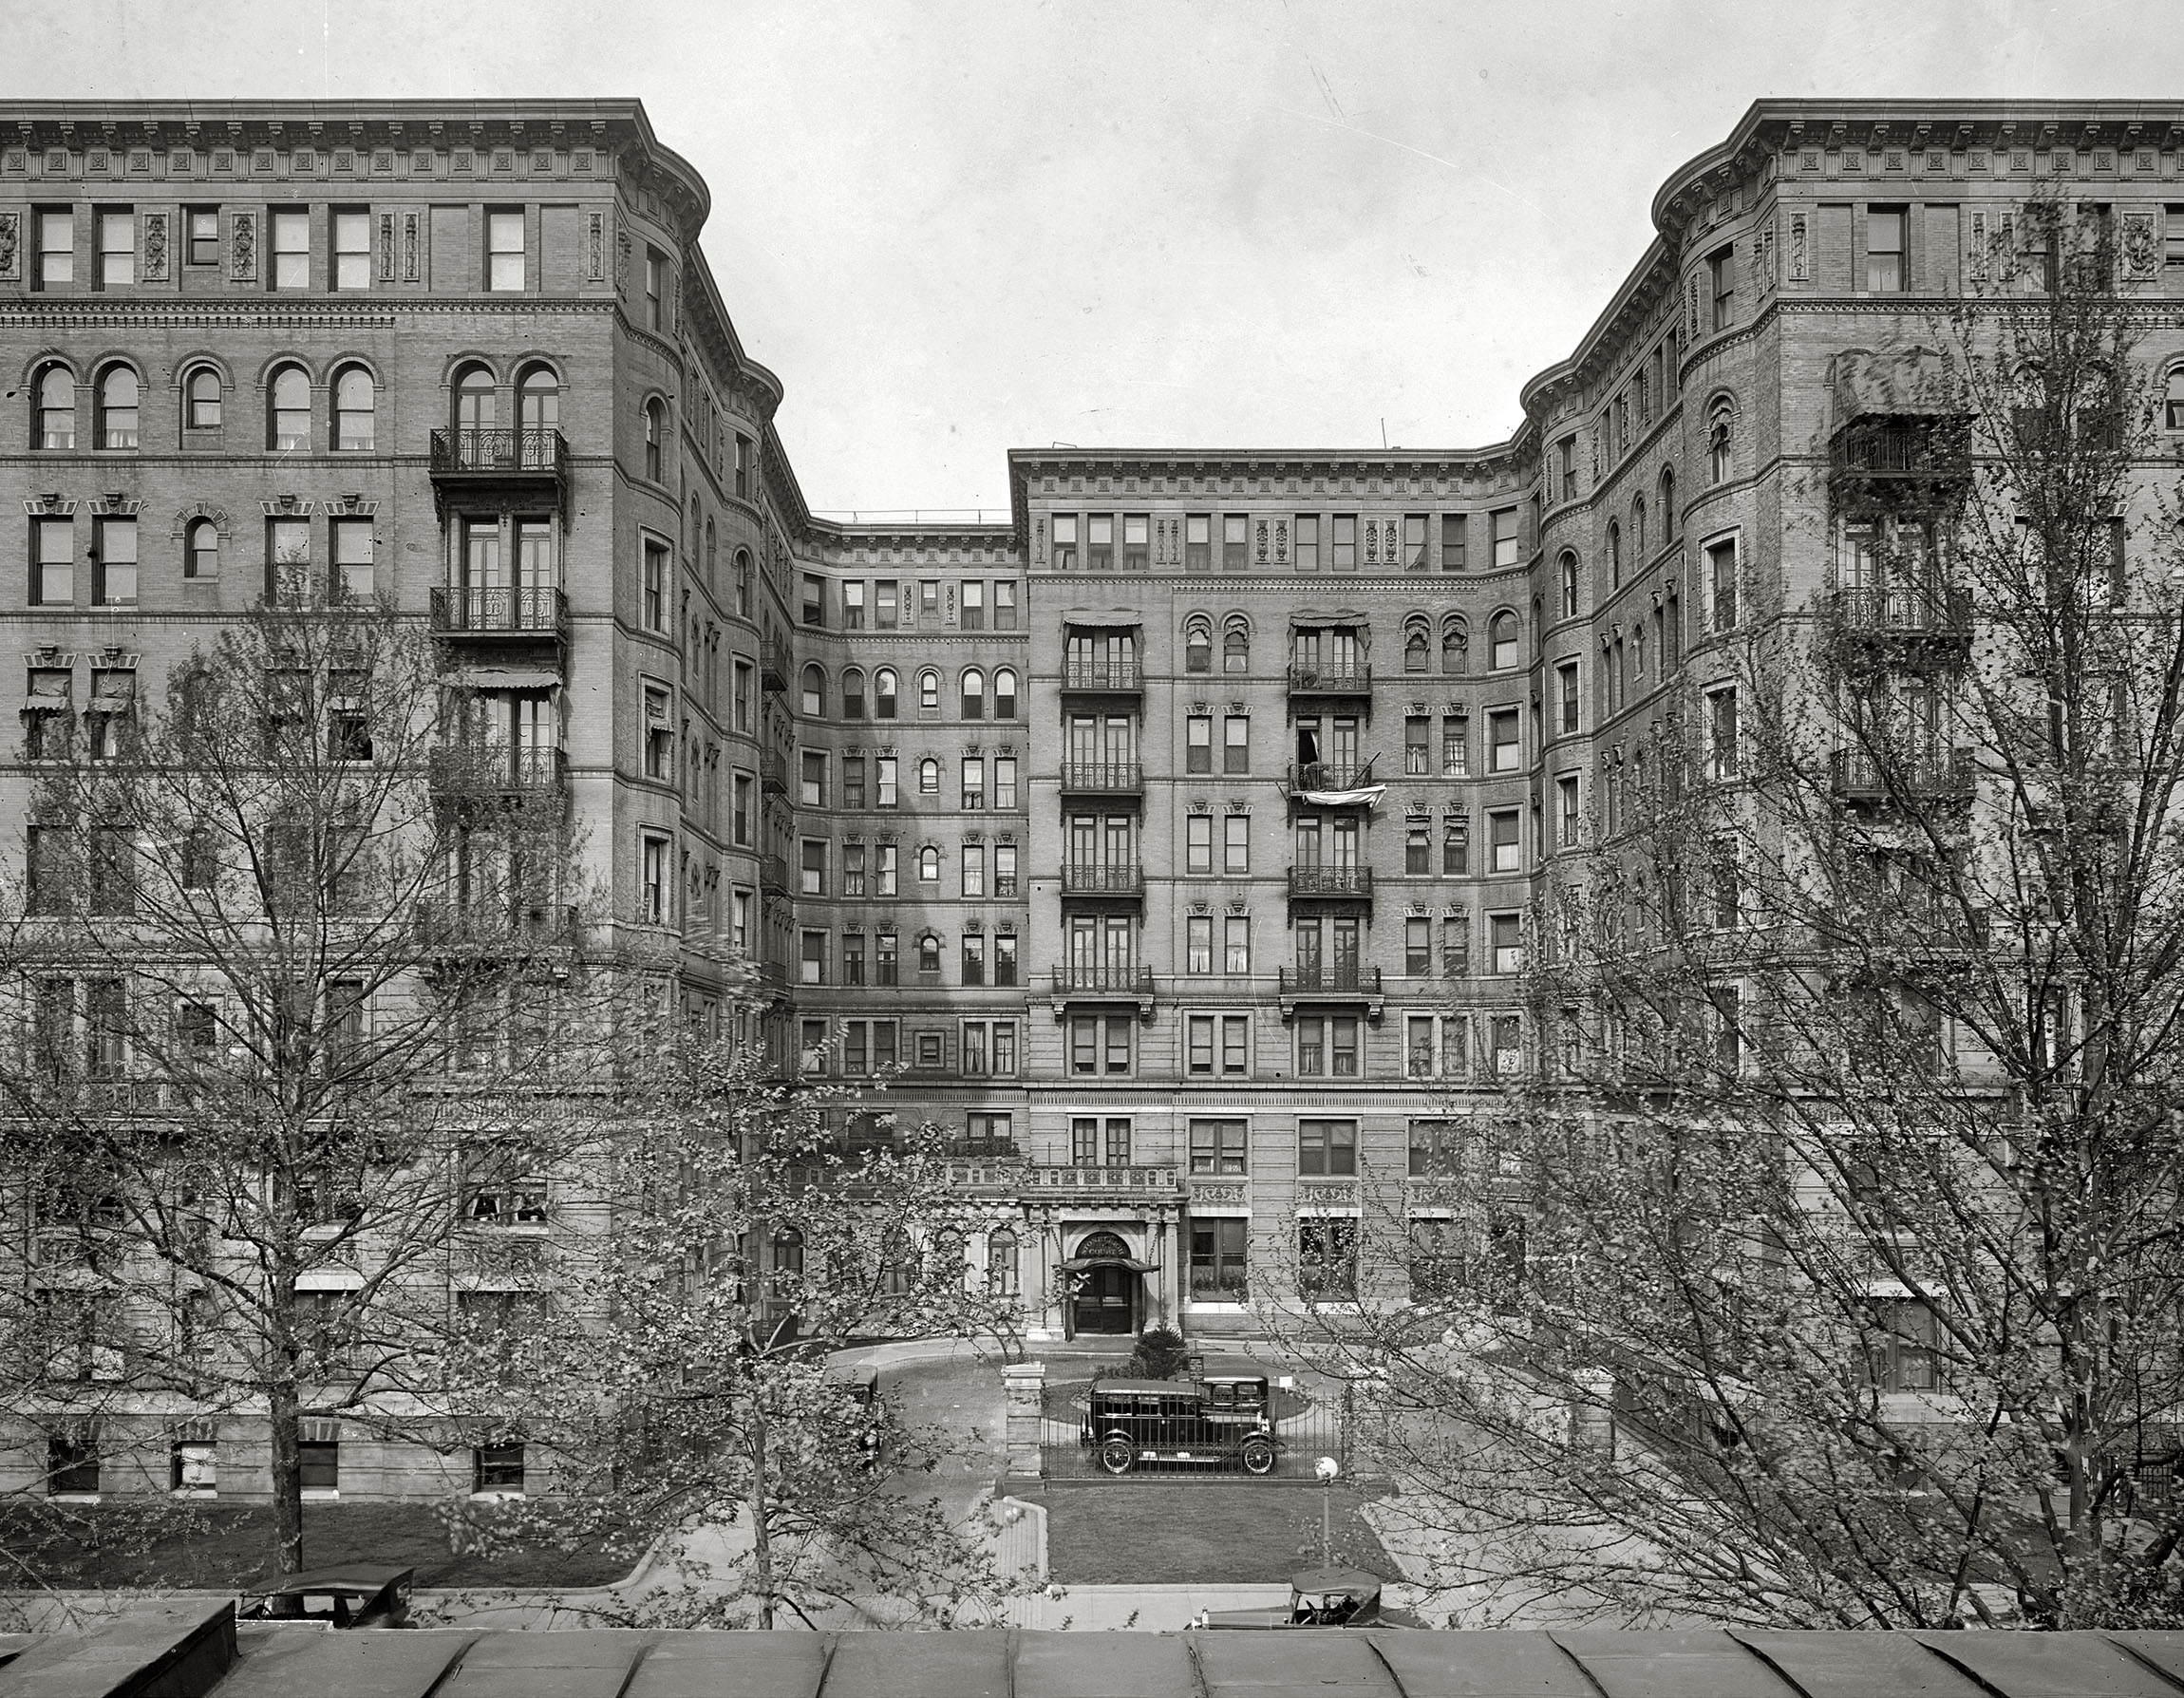 Washington, D.C., in 1925. "Stoneleigh Court, L Street N.W." For some reason I feel like Jimmy Stewart here. National Photo glass negative. View full size.